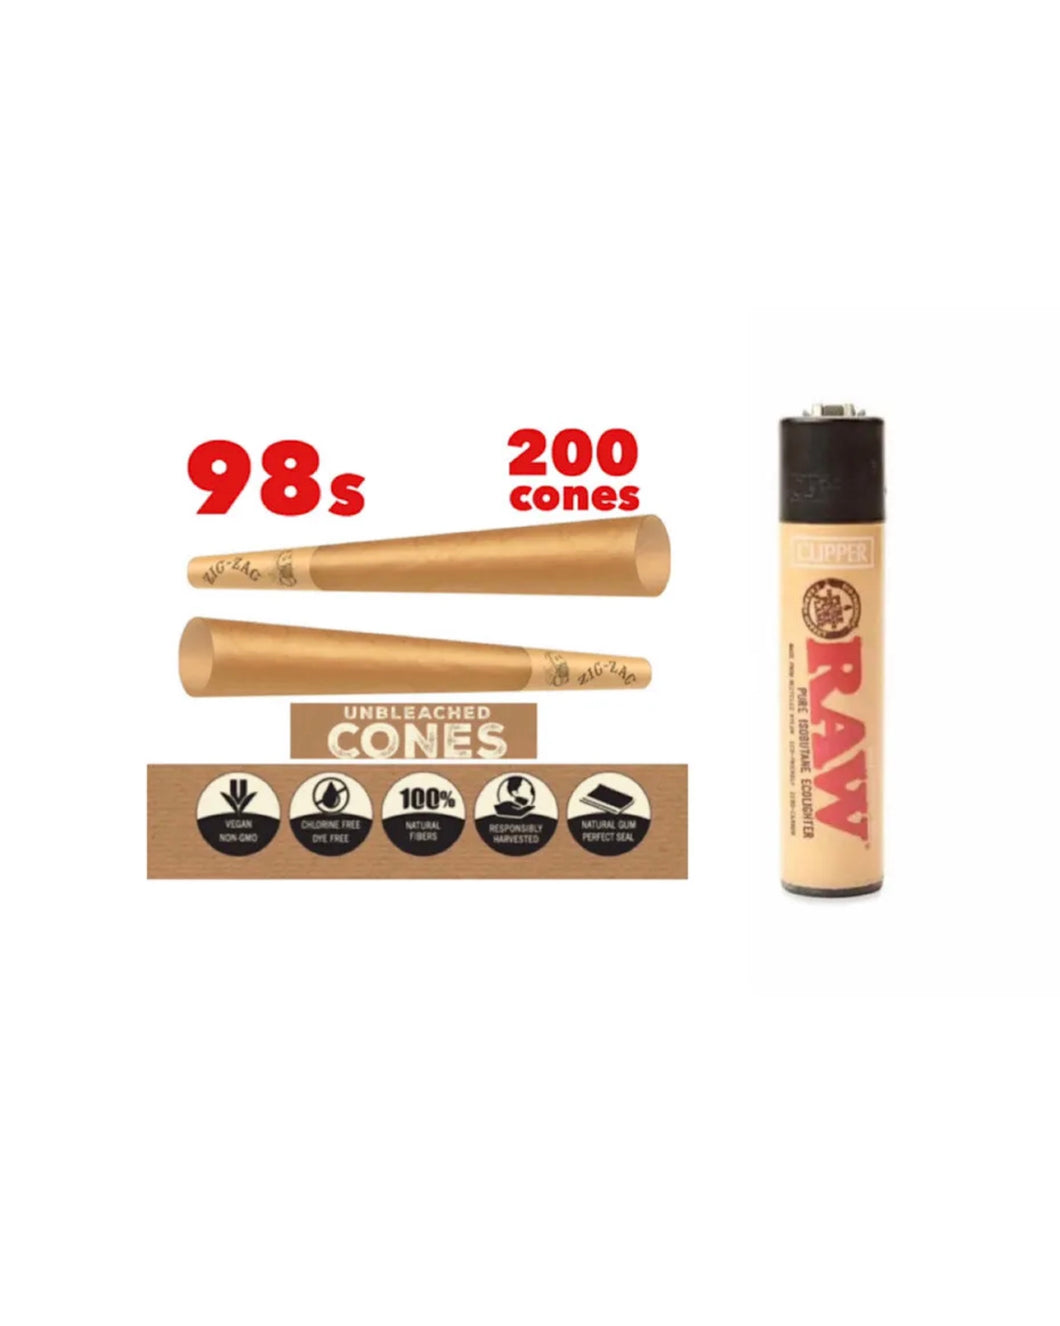 Zig Zag 98 s size Unbleached Cone (200 PK, 100Pack)+clipper raw lighter